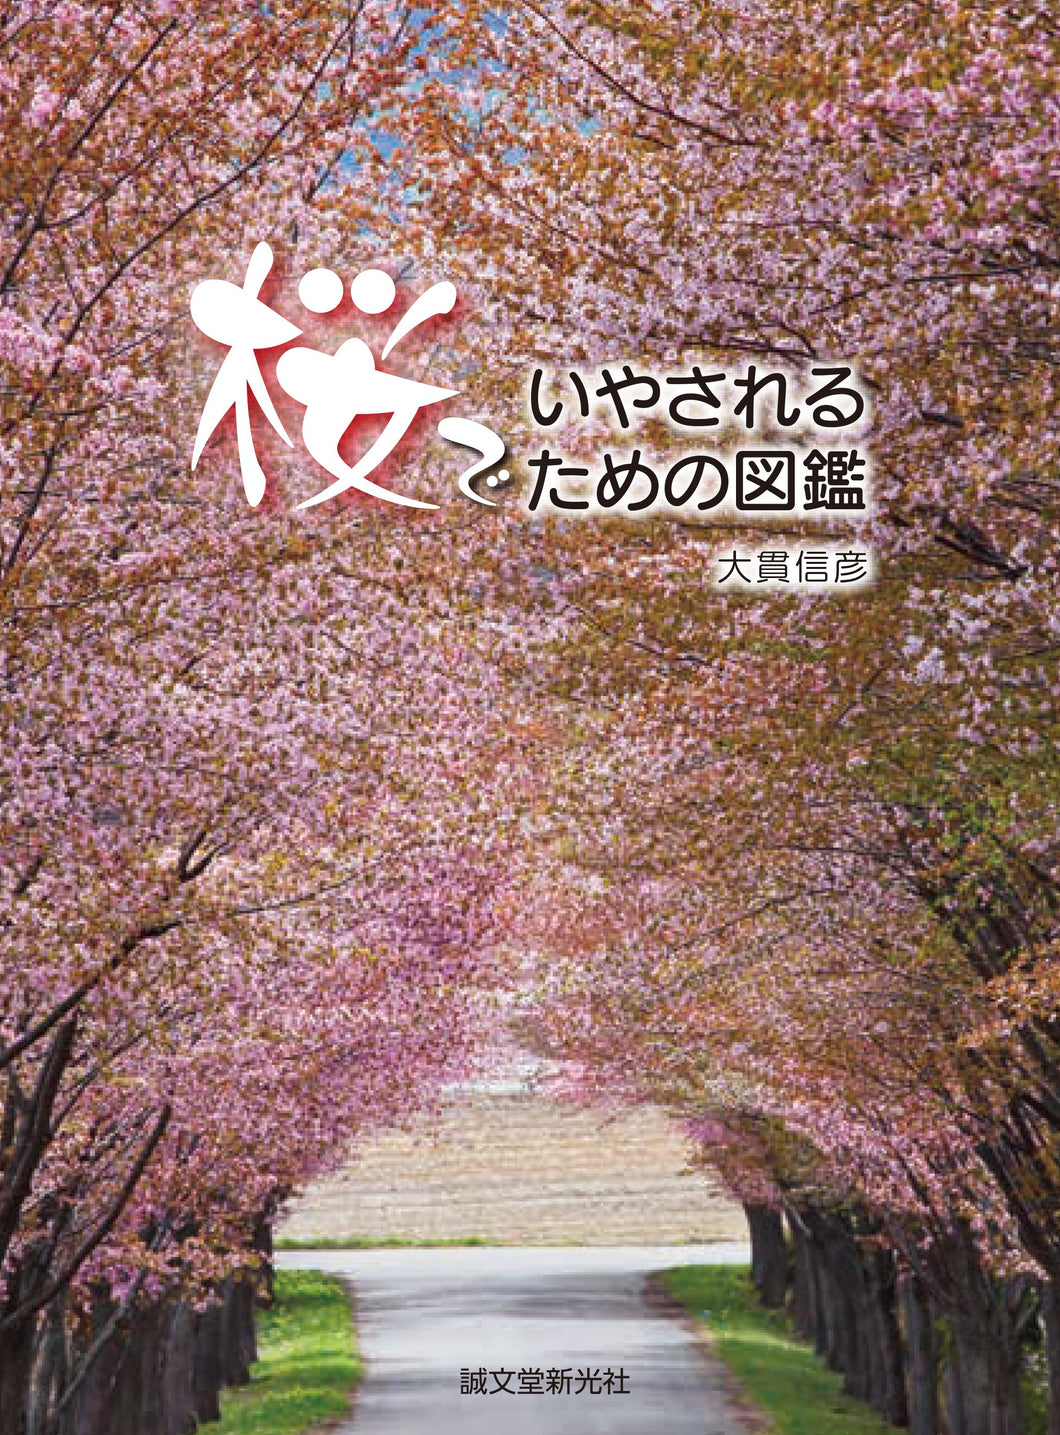 Picture book for being healed by cherry blossoms